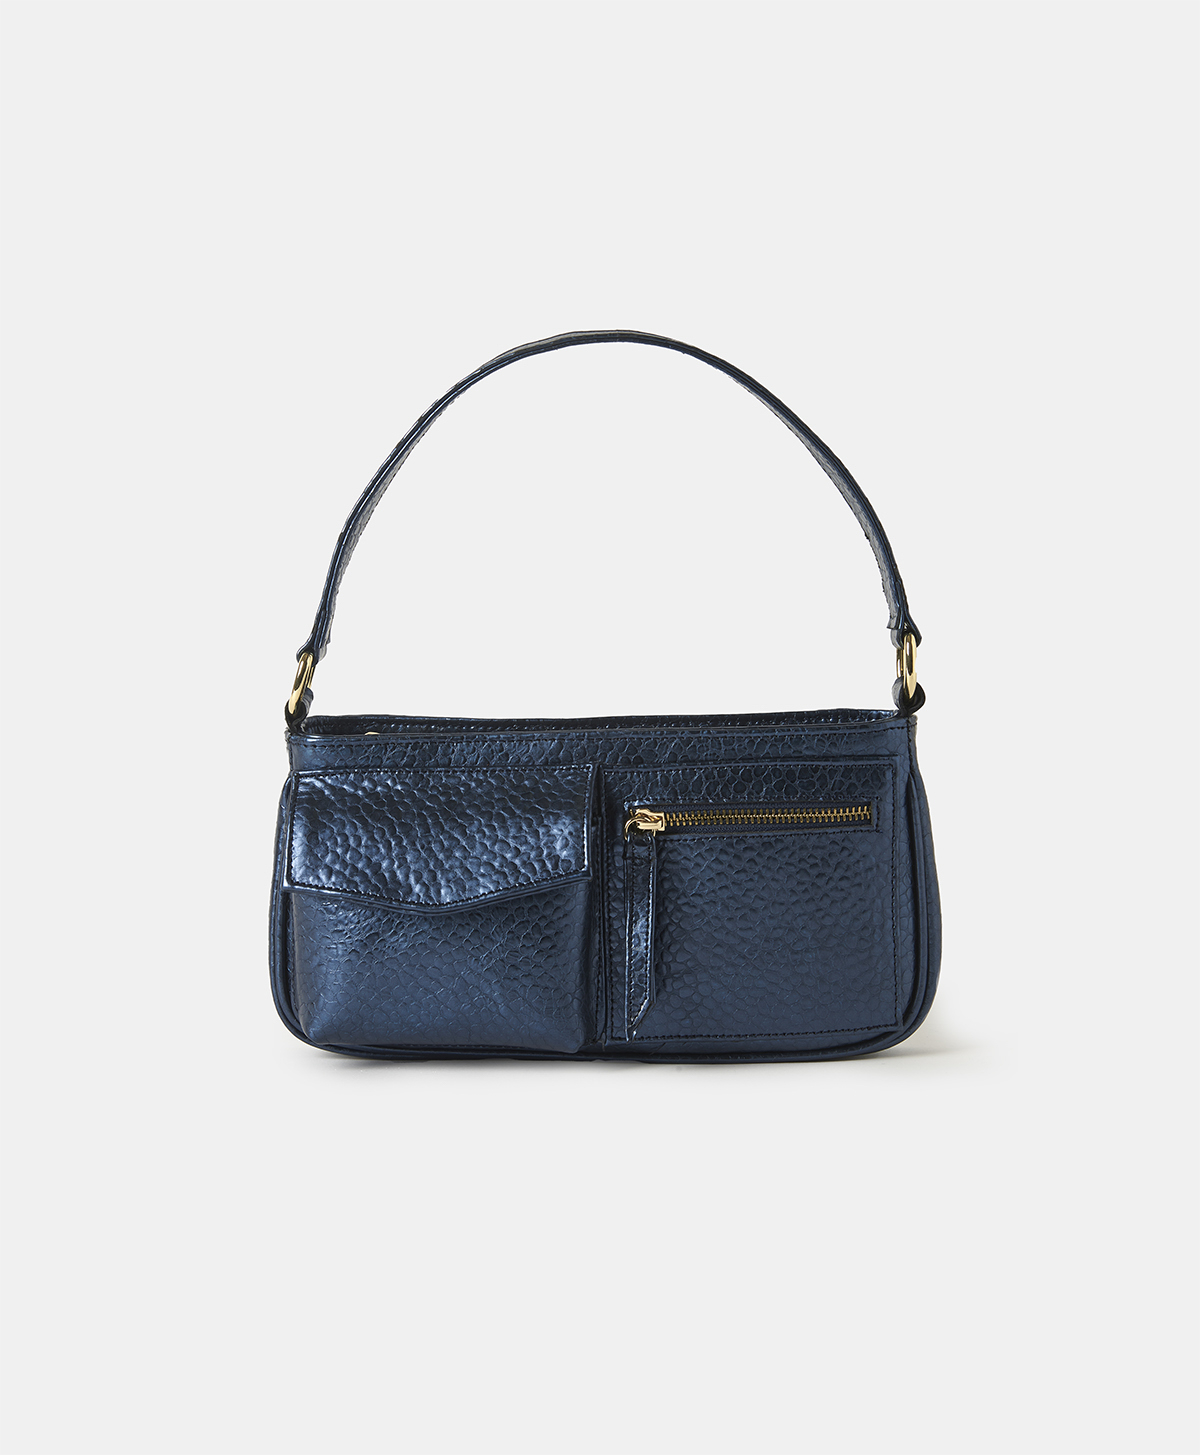 GINEPRO BAG IN LAMÉ LEATHER - BLUE - Momonì